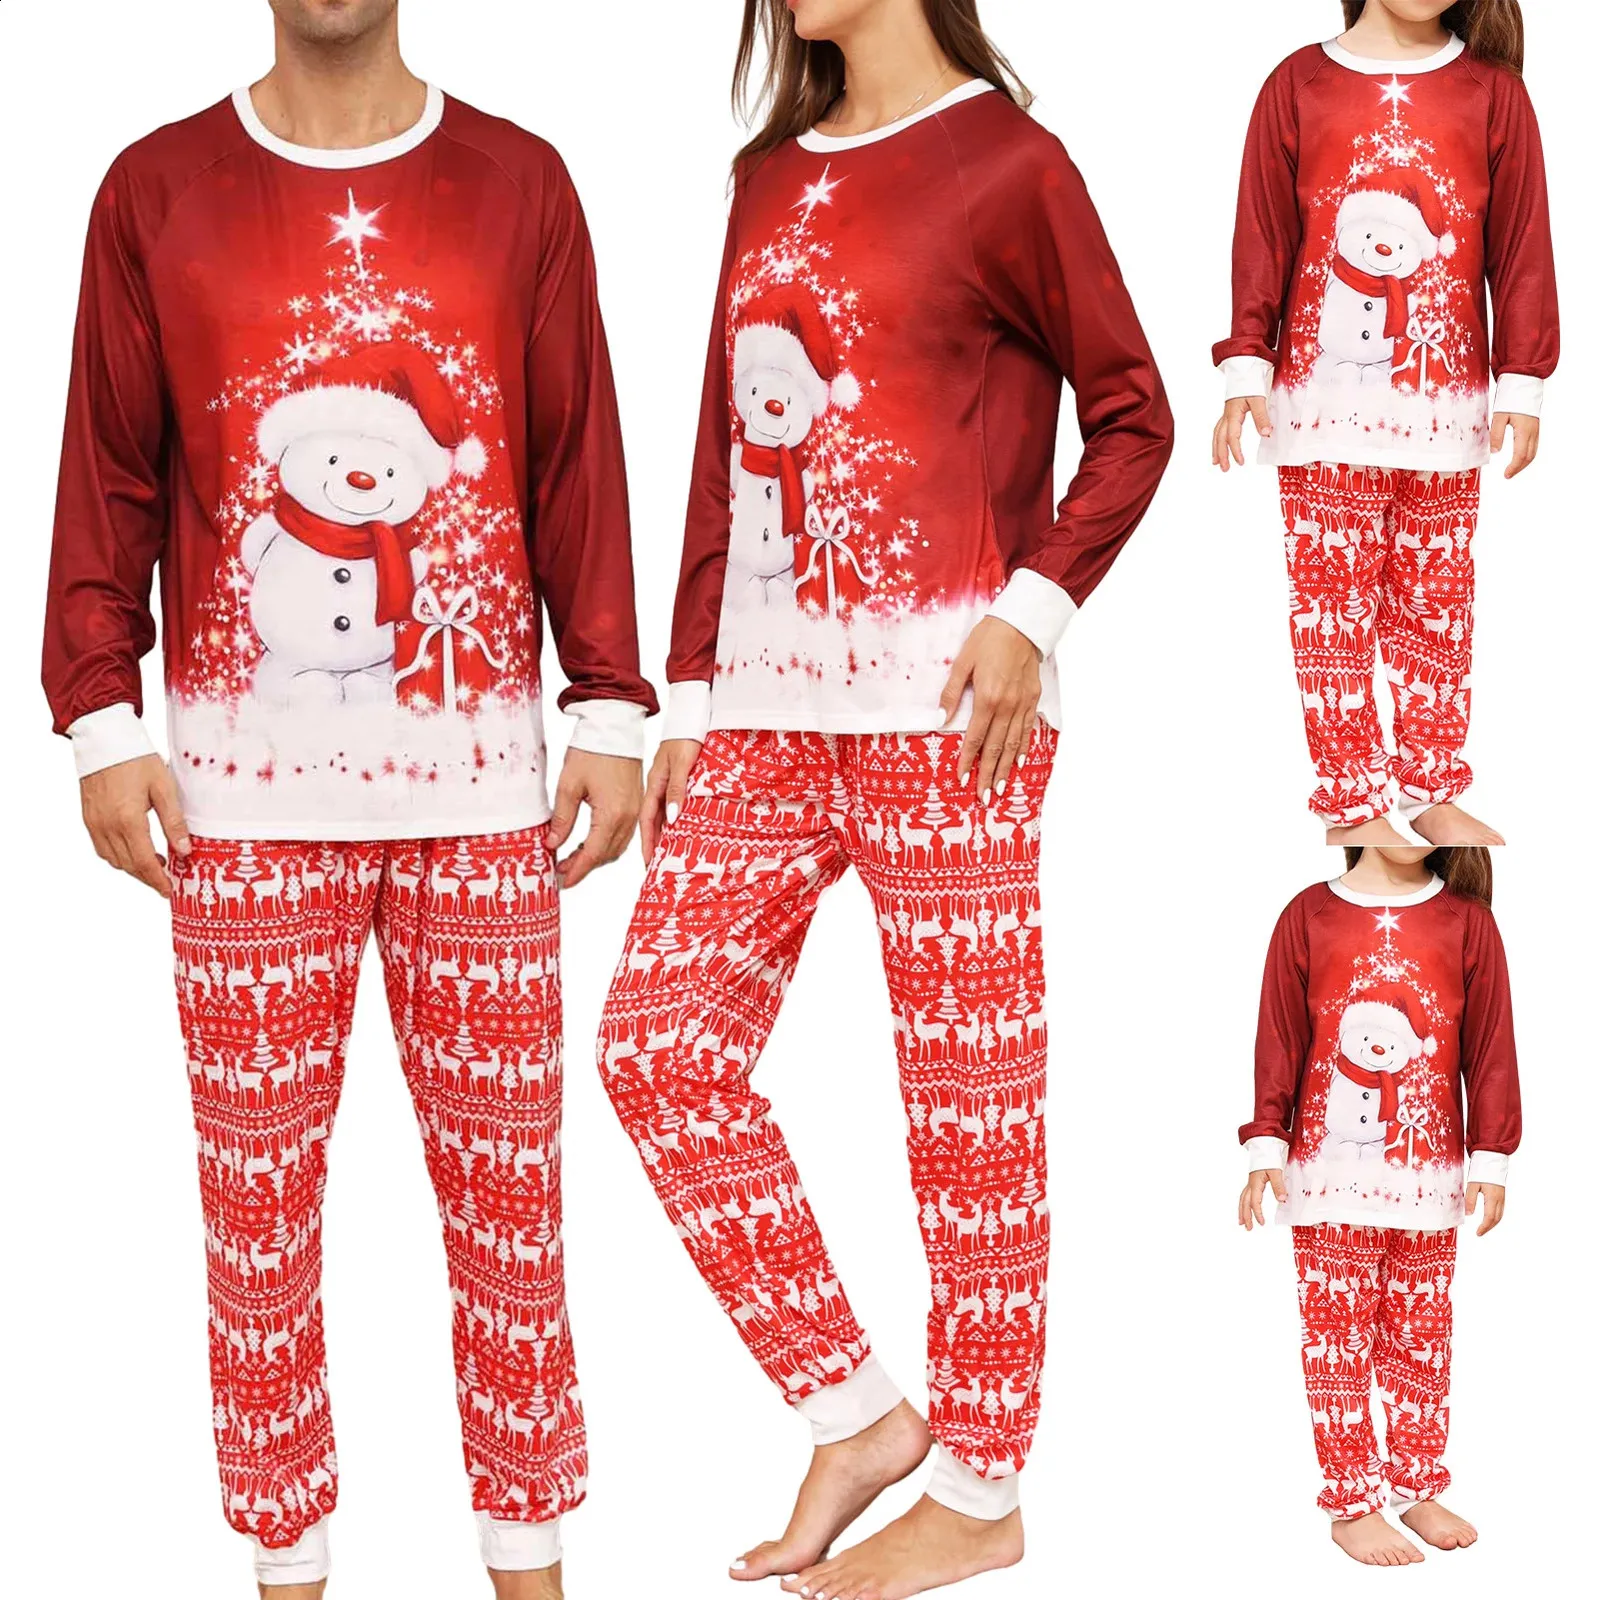 Family Matching Outfits 2 Piece Pajamas Snowman Printed Christmas Set Cozy Holiday Xmas Sleepwear Suit Parent Child Home Clothes 231118